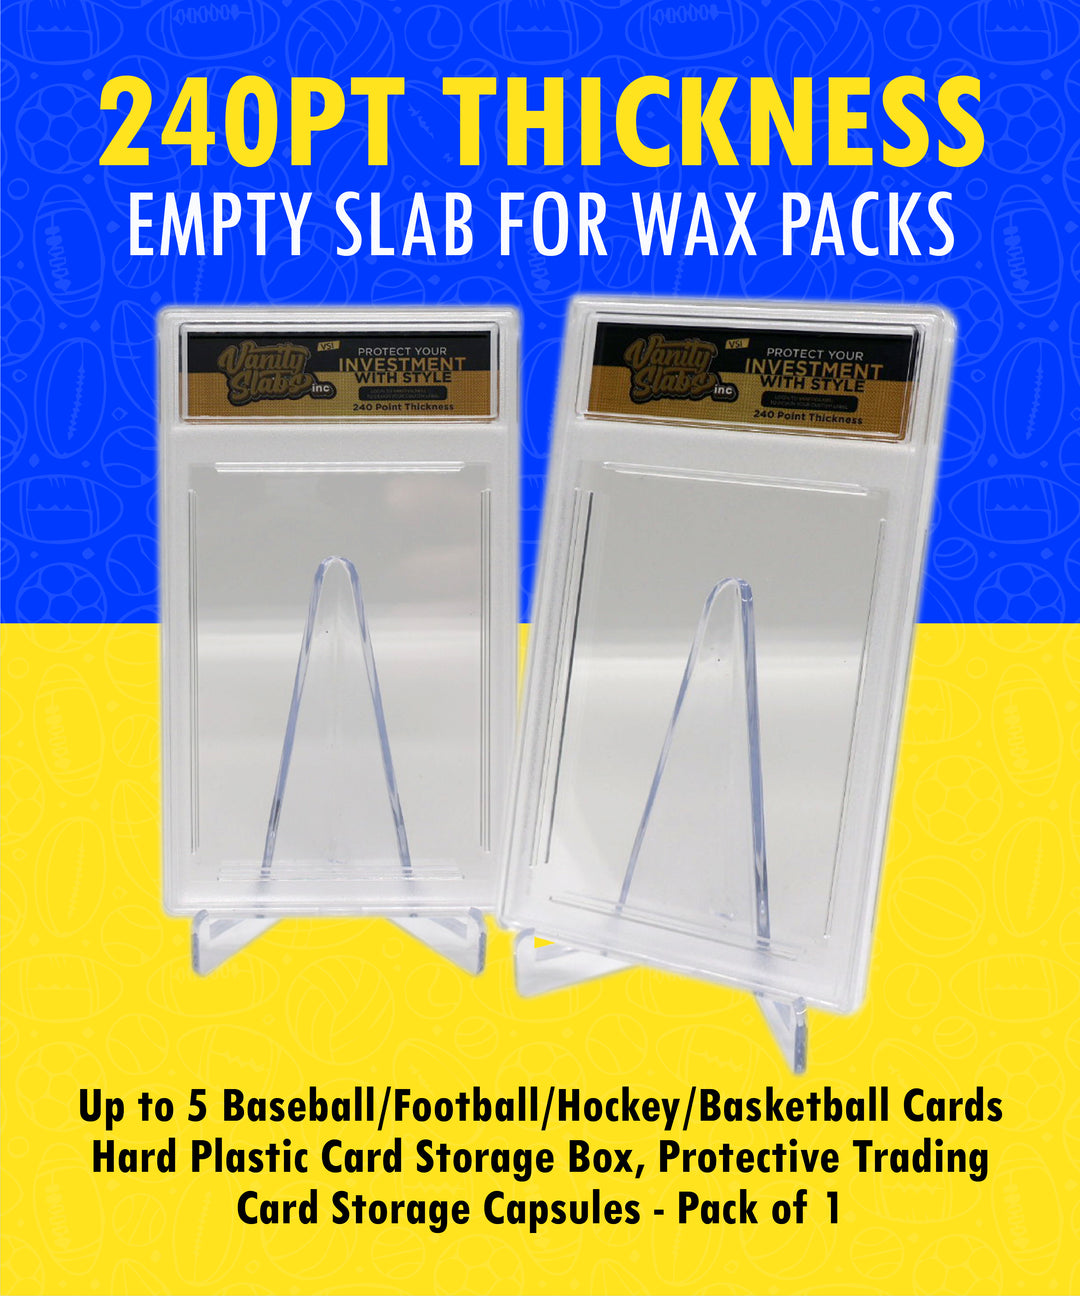 Vanity Slabs 240pt thickness Empty Slab for Wax Packs up to 5 cards thick for Baseball Football Hockey Basketball Cards